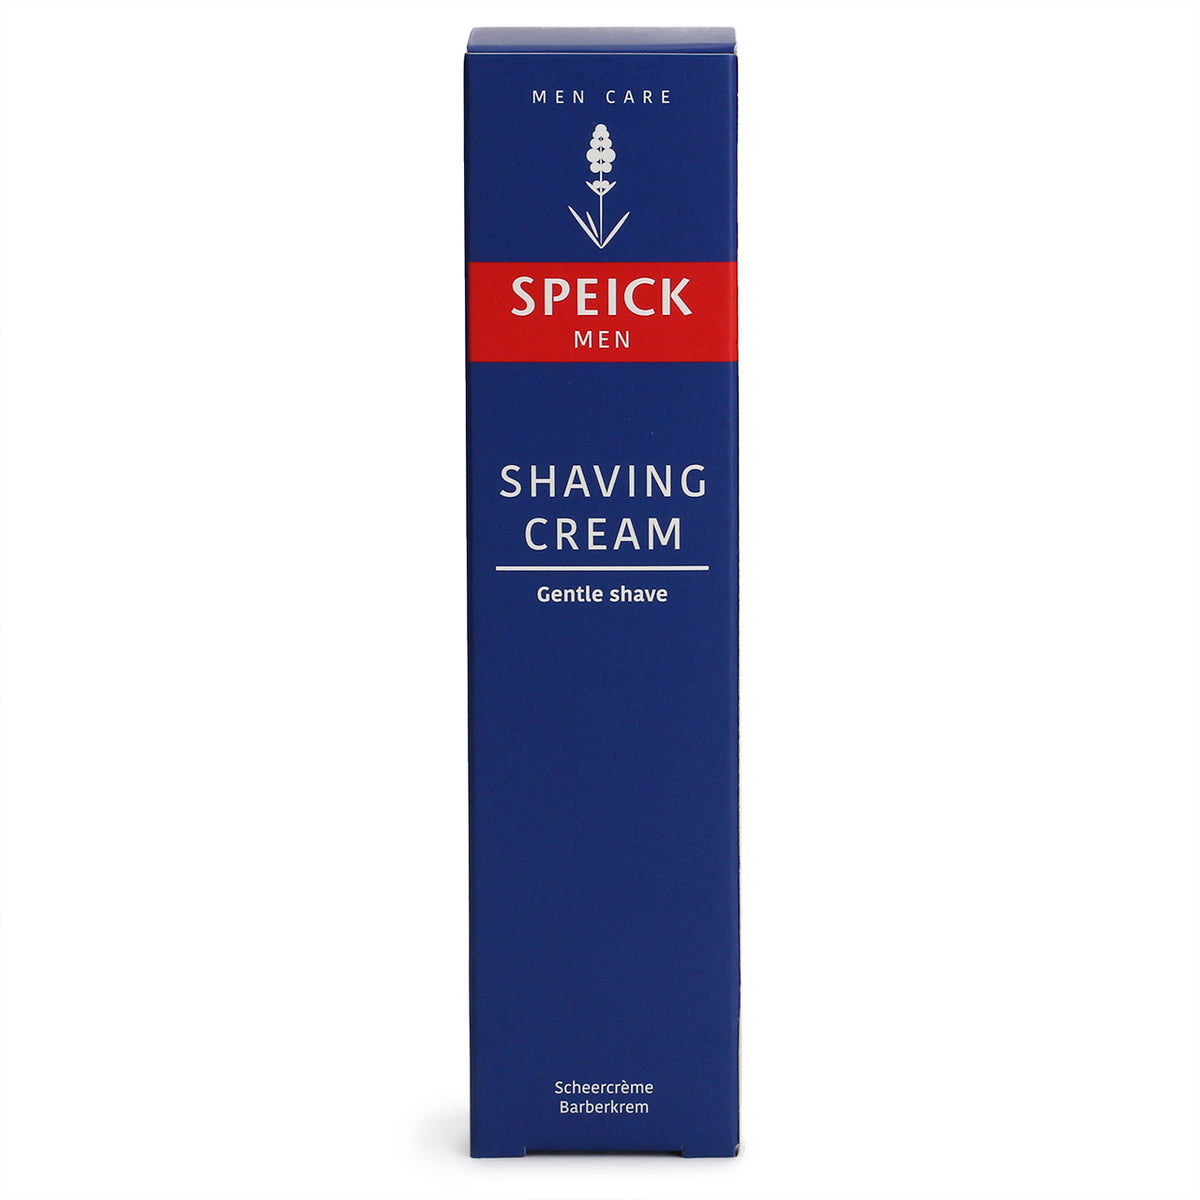 Speick Men Shaving Cream box is mainly blue with a red band and white logo